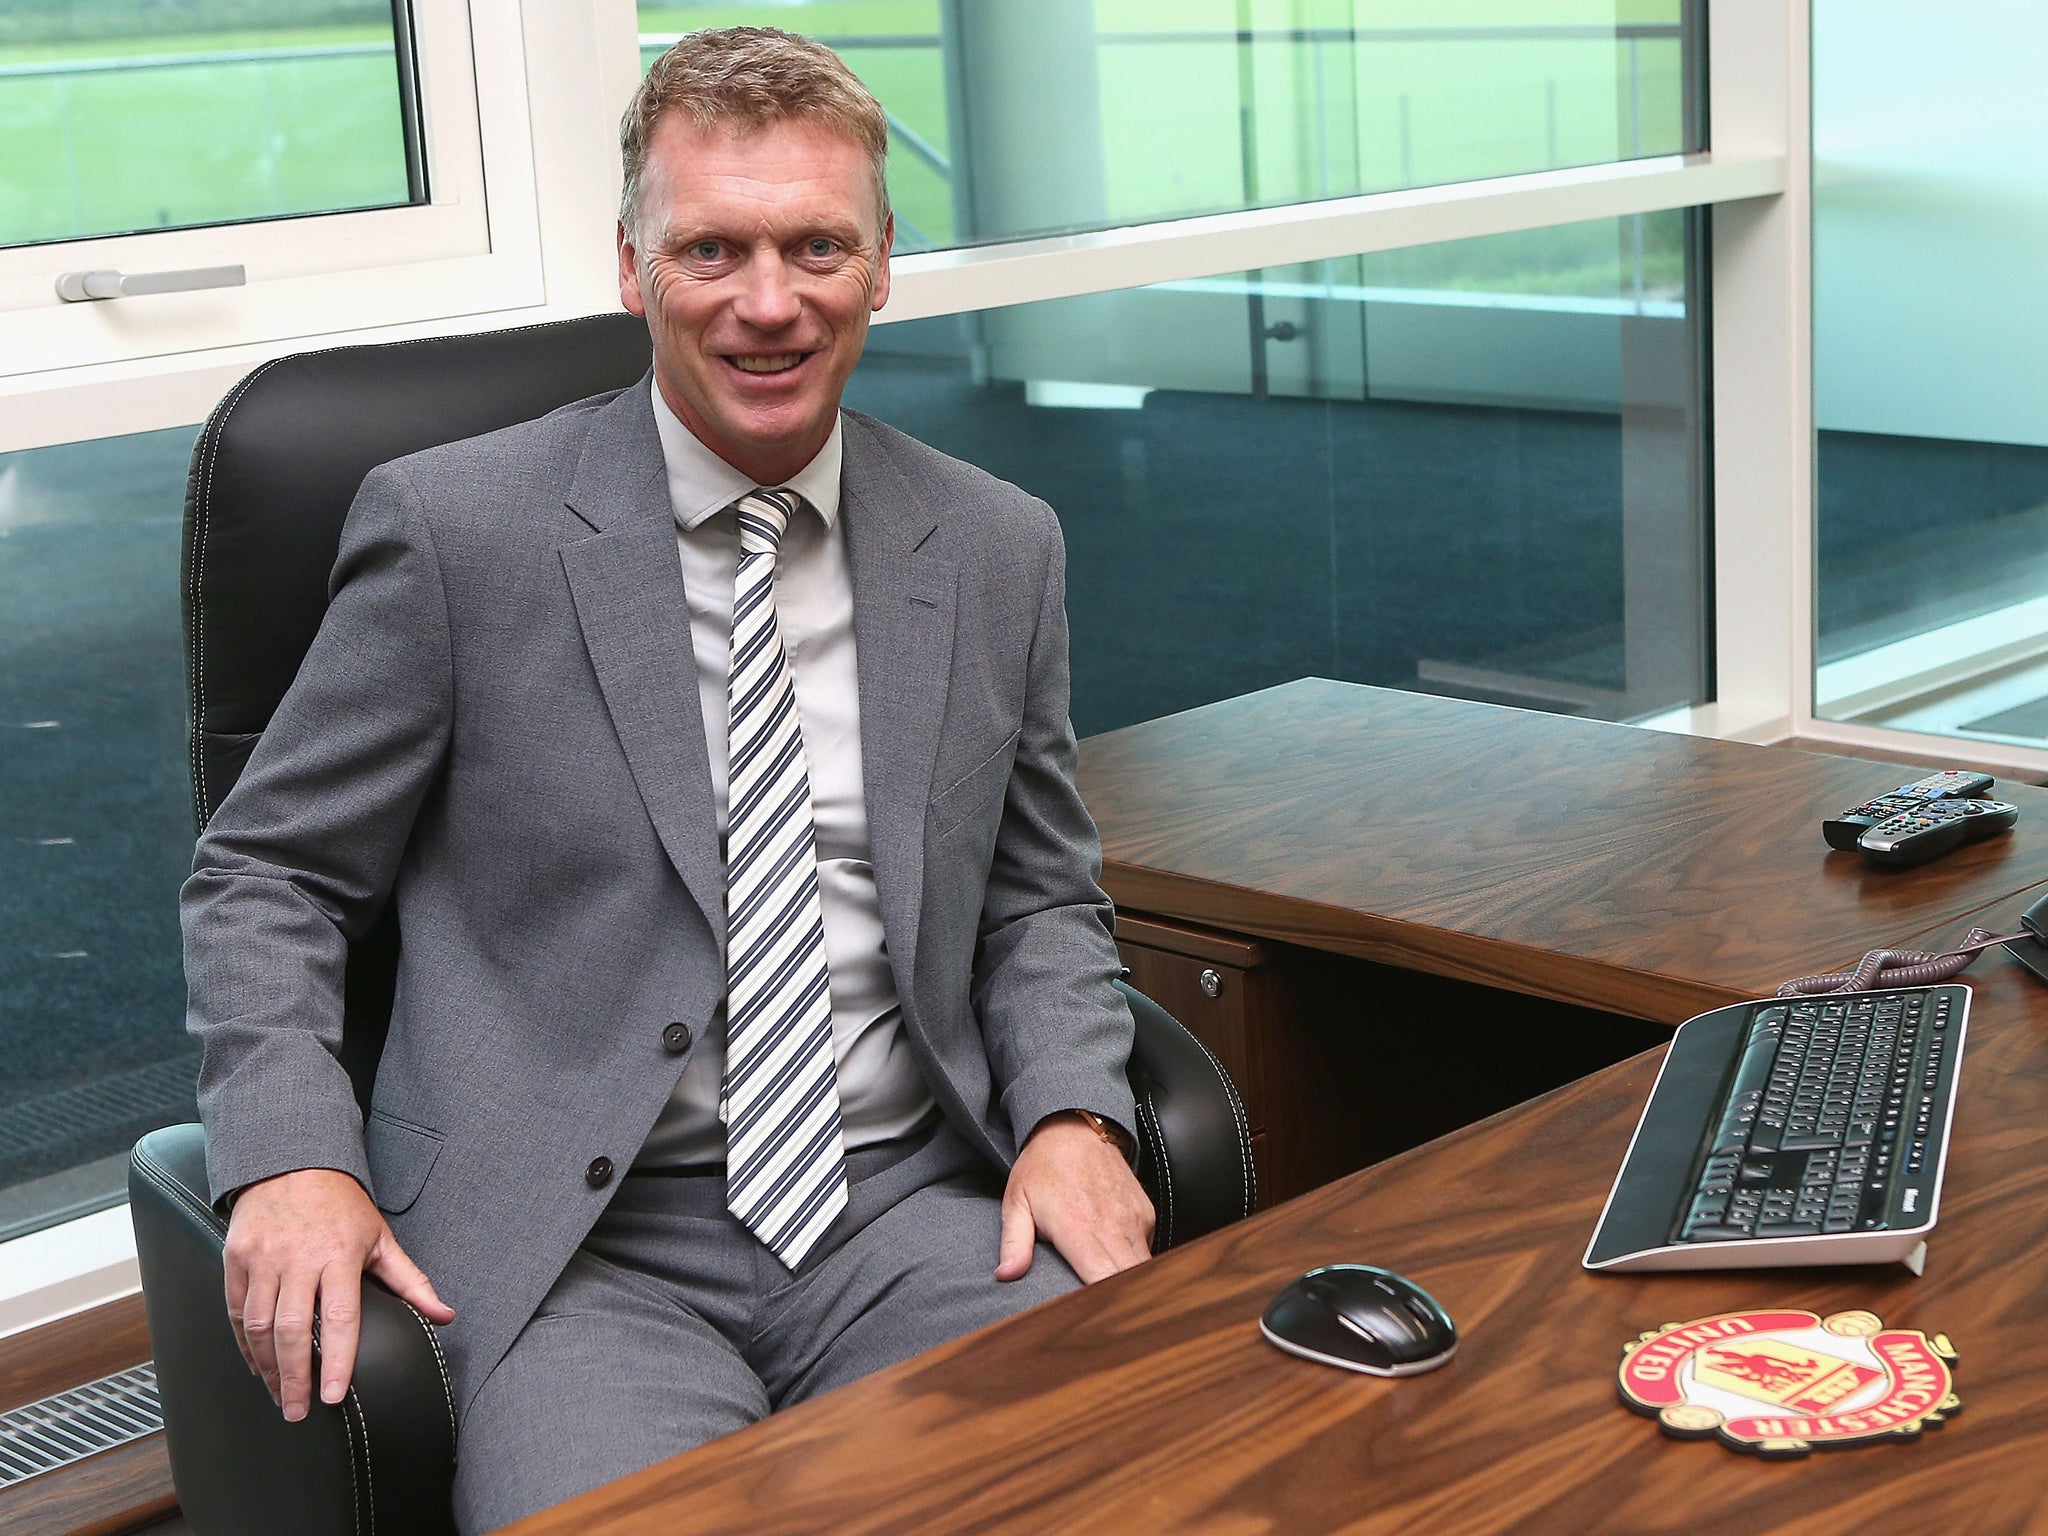 David Moyes gets to grips with his new office on his first day as Manchester United manager